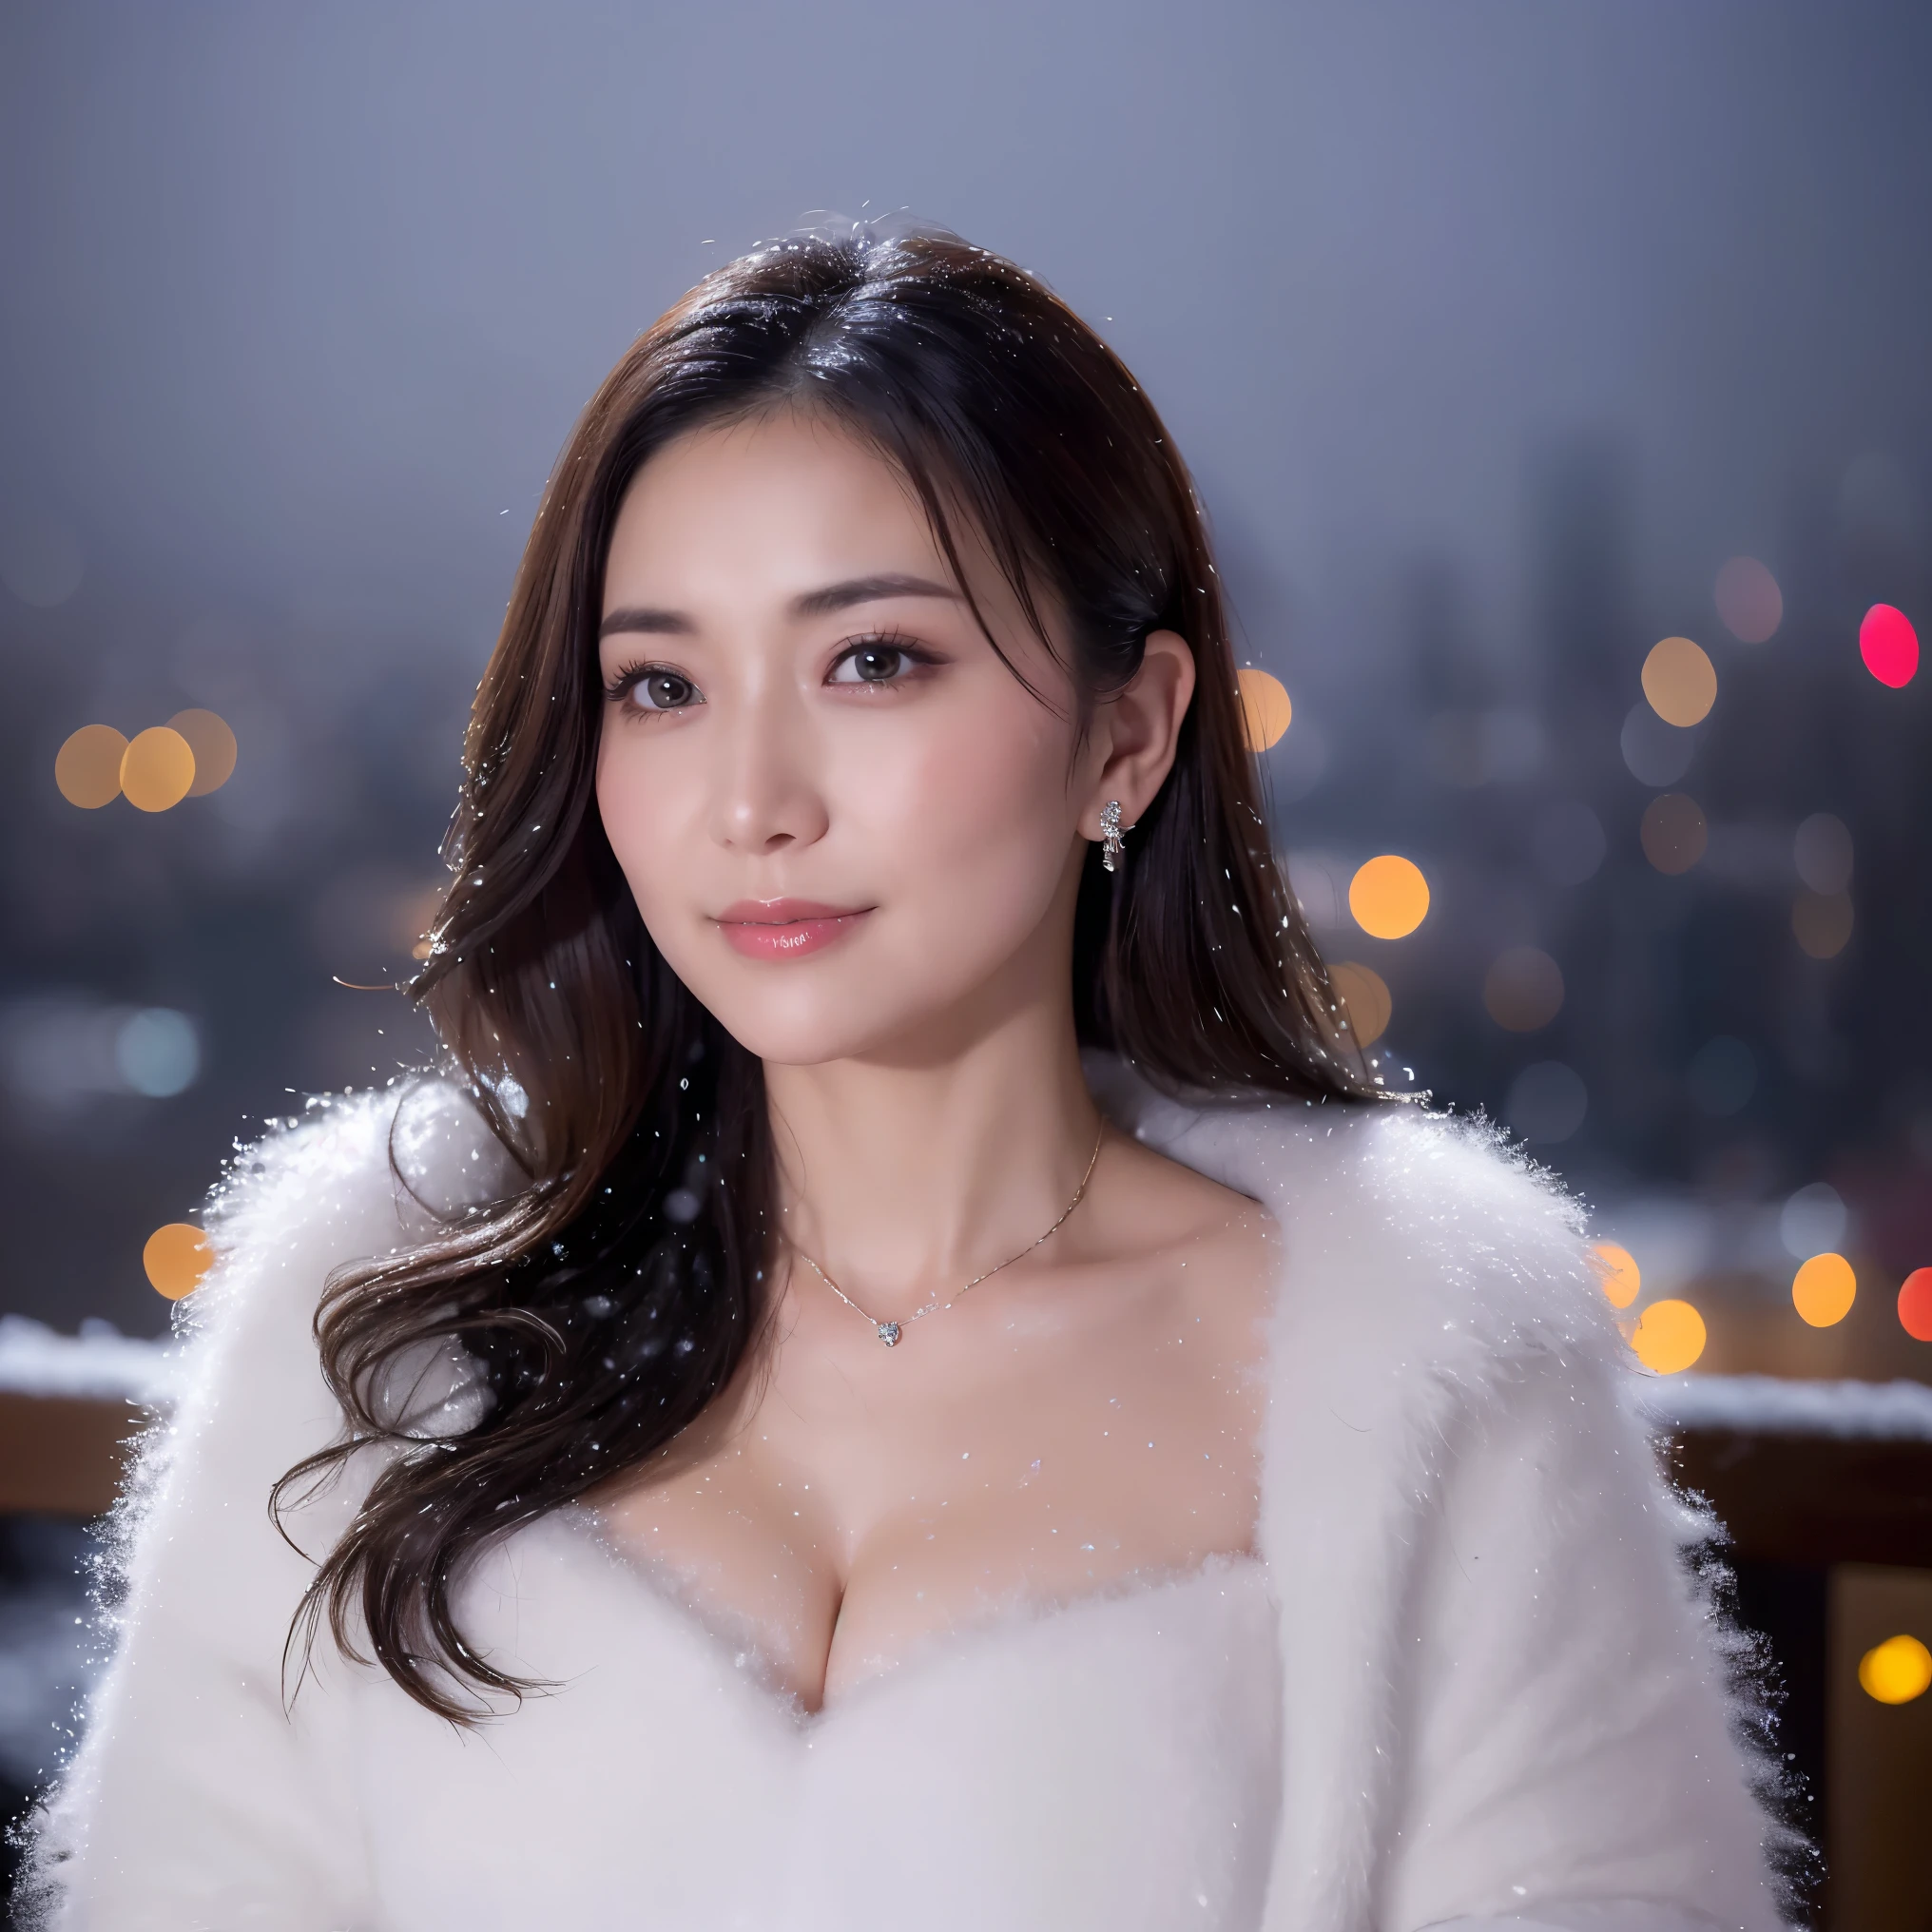 ((highest quality、table top、8K、best image quality、Award-winning work))、one beautiful mature woman、45 year old mature woman、look at me and smile、(close up of face:1.4)、(cleavage:1.1)、(big breasts:1.1)、(Perfect and classy thick fur coat:1.3)、epic movie lighting、(romantic love feelings:1.2)、(The most romantic and moody atmosphere:1.2)、(winter city:1.1)、Snow scenery of the city:1.1)、(The snow in the air sparkles finely:1.2)、(that&#39;It&#39;s snowing heavily:1.1)、(Tyndall effect:1.1)、(Night view of a snowy city:1.5)、Shining beautiful skin、(accurate anatomy:1.1)、Ultra high definition beauty face、long eyelashes、natural makeup、ultra high definition hair、ultra high resolution eyes、(Shining beautiful skin with ultra-high resolution:1.1)、Super high resolution glossy lips、radiant beautiful skin